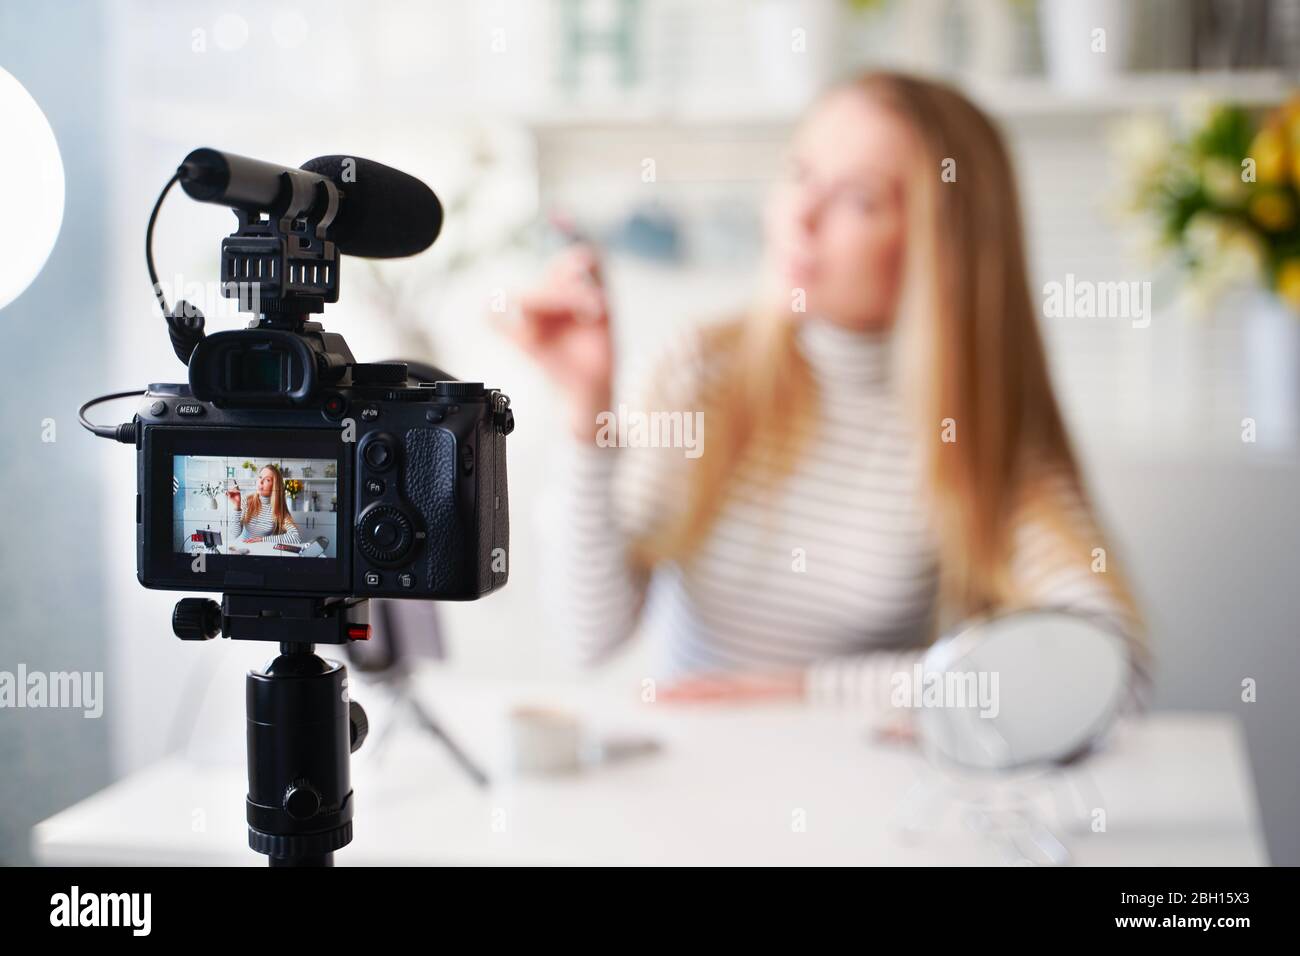 Display of camera recording video blog for blonde beauty blogger woman with make-up at home studio. Influencer vlogger girl live streaming cosmetics Stock Photo